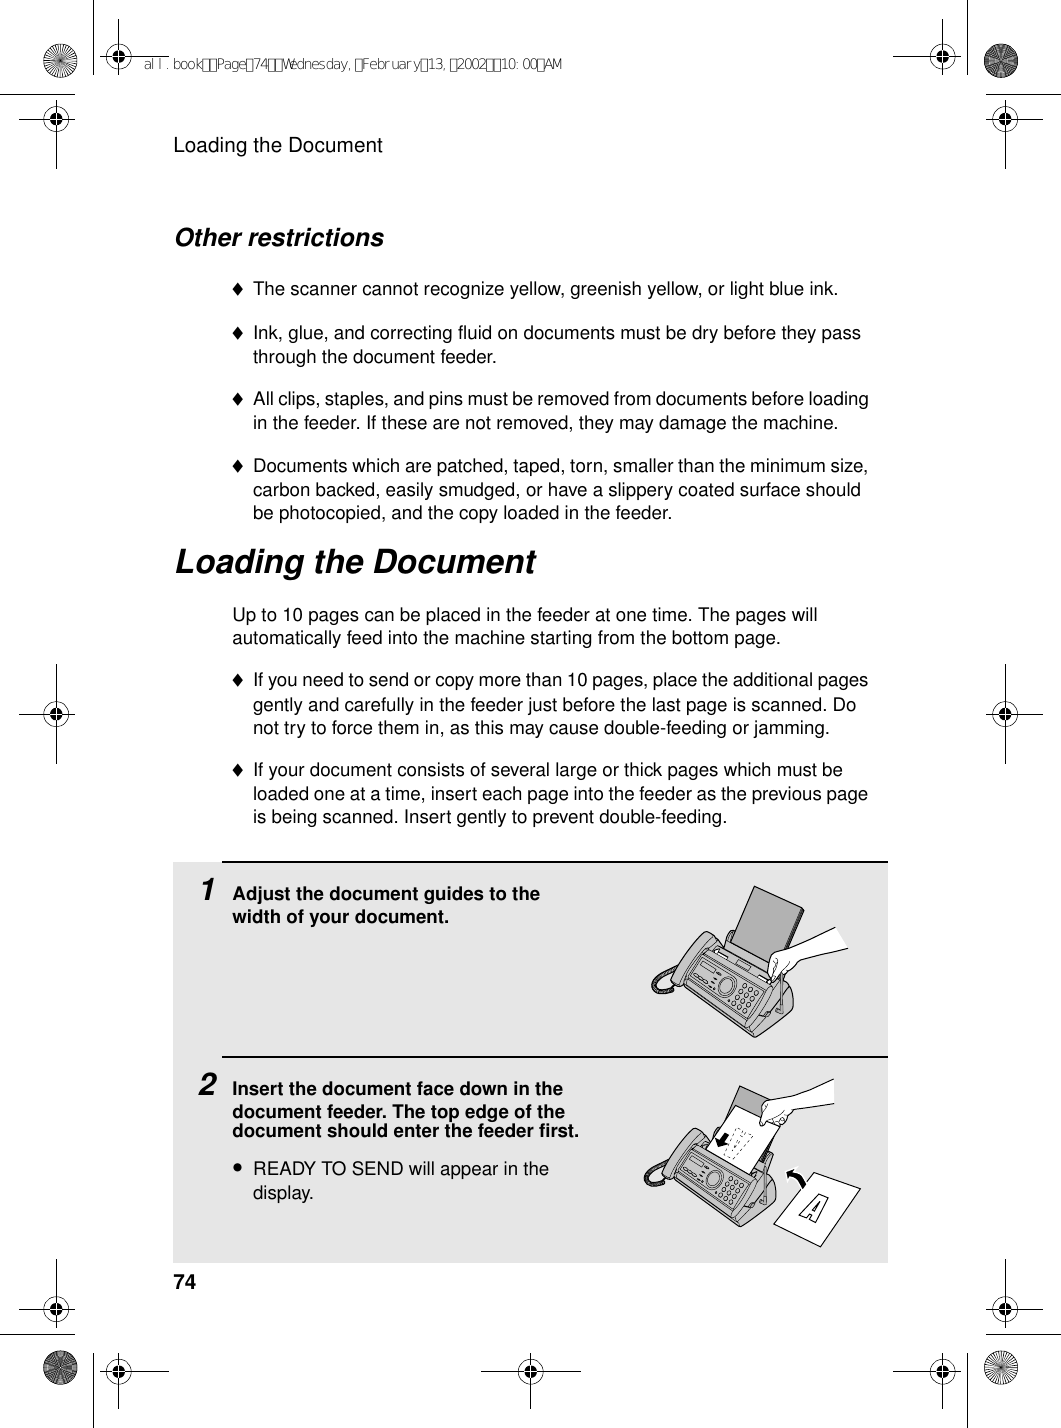 Loading the Document74Other restrictions♦The scanner cannot recognize yellow, greenish yellow, or light blue ink.♦Ink, glue, and correcting fluid on documents must be dry before they pass through the document feeder.♦All clips, staples, and pins must be removed from documents before loading in the feeder. If these are not removed, they may damage the machine.♦Documents which are patched, taped, torn, smaller than the minimum size, carbon backed, easily smudged, or have a slippery coated surface should be photocopied, and the copy loaded in the feeder.Loading the DocumentUp to 10 pages can be placed in the feeder at one time. The pages will automatically feed into the machine starting from the bottom page.♦If you need to send or copy more than 10 pages, place the additional pages gently and carefully in the feeder just before the last page is scanned. Do not try to force them in, as this may cause double-feeding or jamming.♦If your document consists of several large or thick pages which must be loaded one at a time, insert each page into the feeder as the previous page is being scanned. Insert gently to prevent double-feeding.1Adjust the document guides to the width of your document.2Insert the document face down in the document feeder. The top edge of the document should enter the feeder first.•READY TO SEND will appear in the display.all.bookPage74Wednesday,February13,200210:00AM